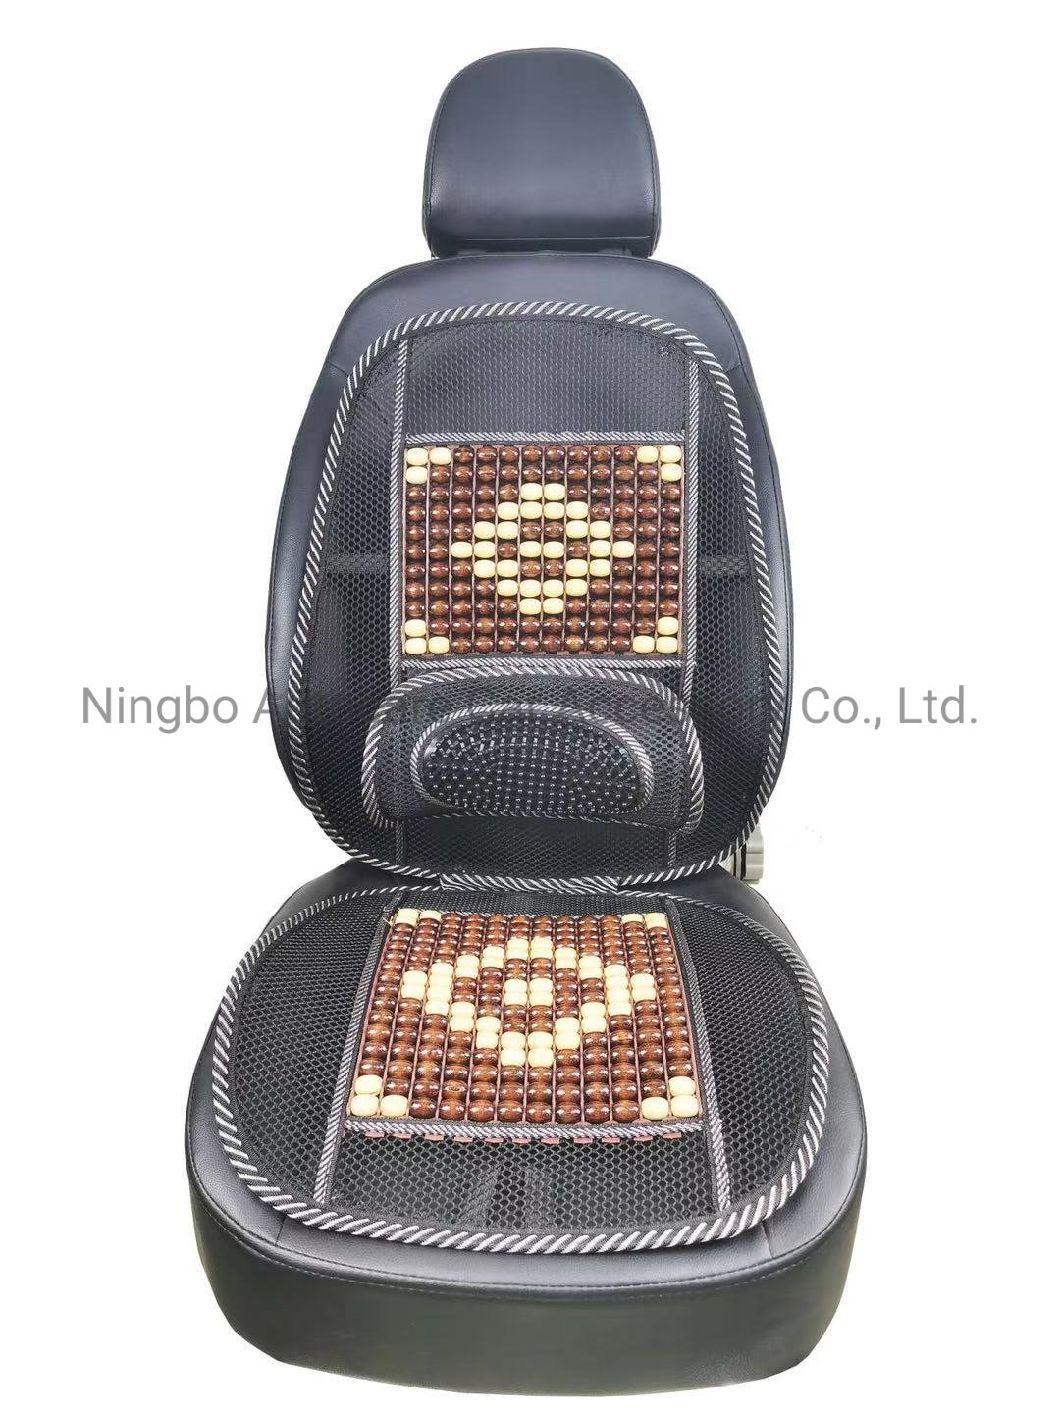 Wooden Beads Seat Cushions High Quality Double Line Wooden Beads Seat Cushion